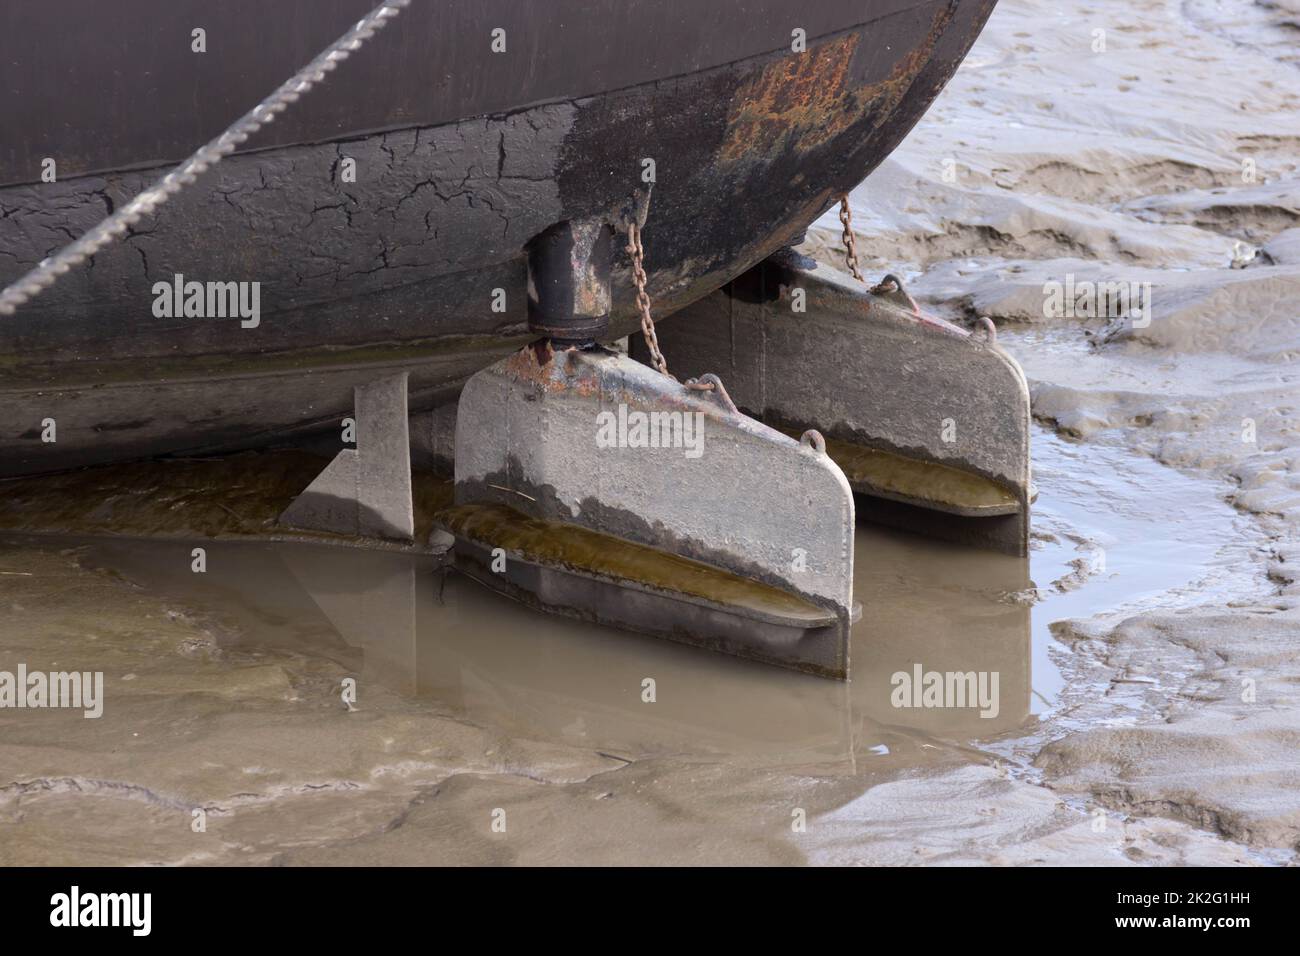 Stern of a ship with rudder in the silt Stock Photo